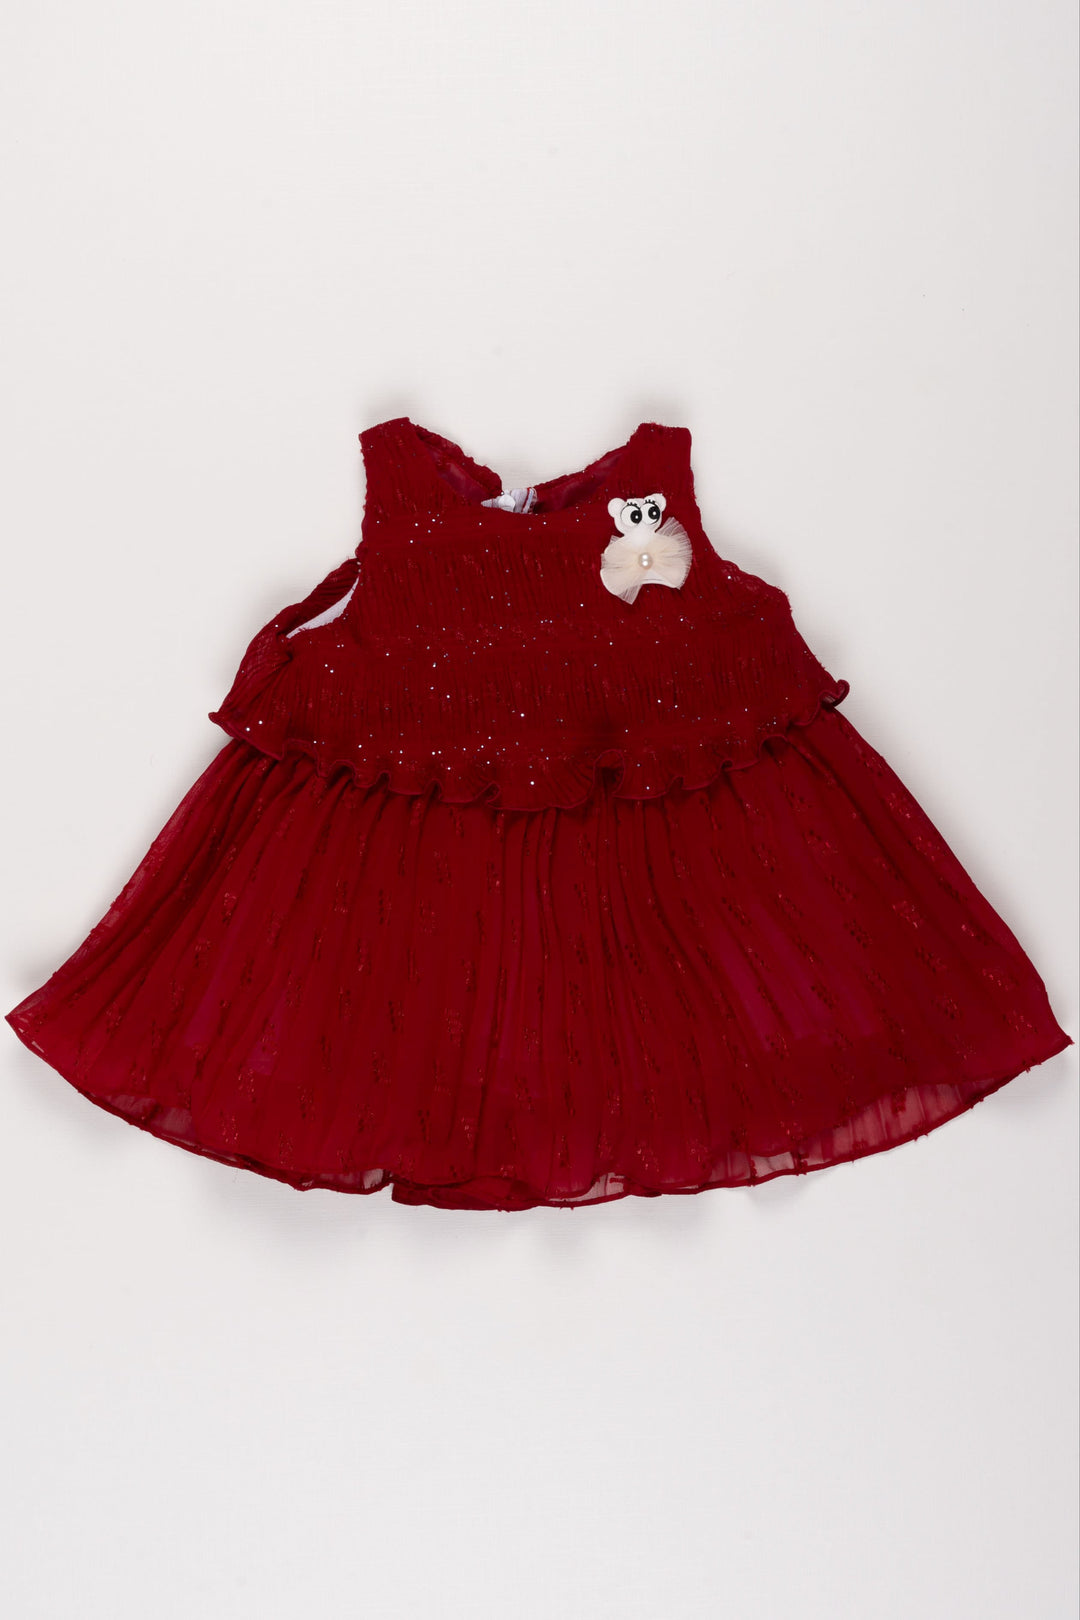 The Nesavu Baby Fancy Frock Baby Girl's Festive Maroon Baby Frock with Sparkling Sequin Details Nesavu 12 (3M) / Maroon BFJ499A-12 Maroon Velvet Sequin Baby Frock | Festive Occasion Wear | The Nesavu